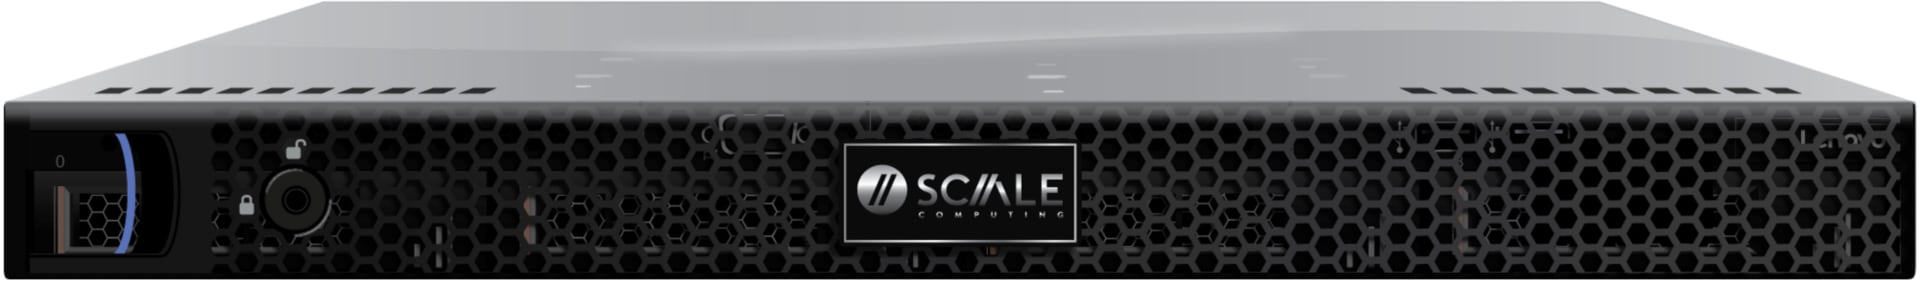 Scale Computing HC1350 Chassis